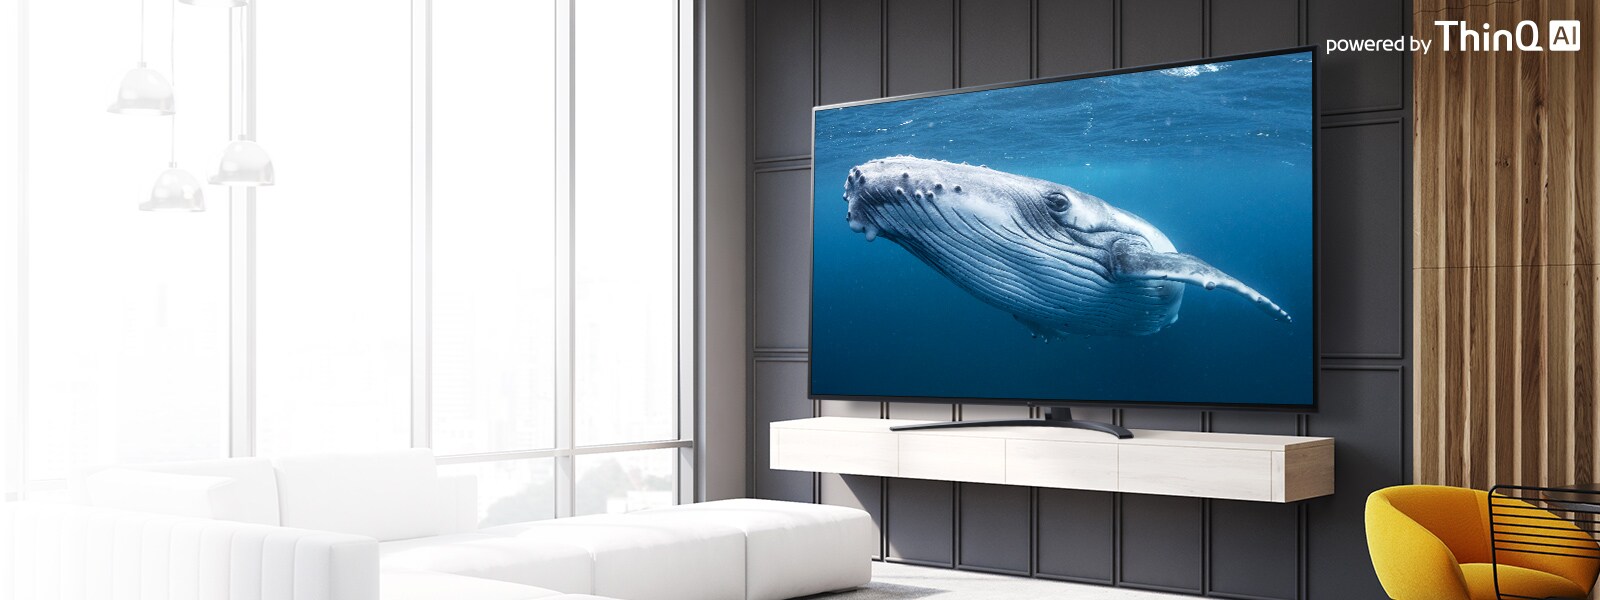 In a living room, there is a large screen TV displaying an image of a big whale in the sea. On the image, there is an introduction of a large screen TV on the left center and a powered by ThinQ AI logo on the upper right.